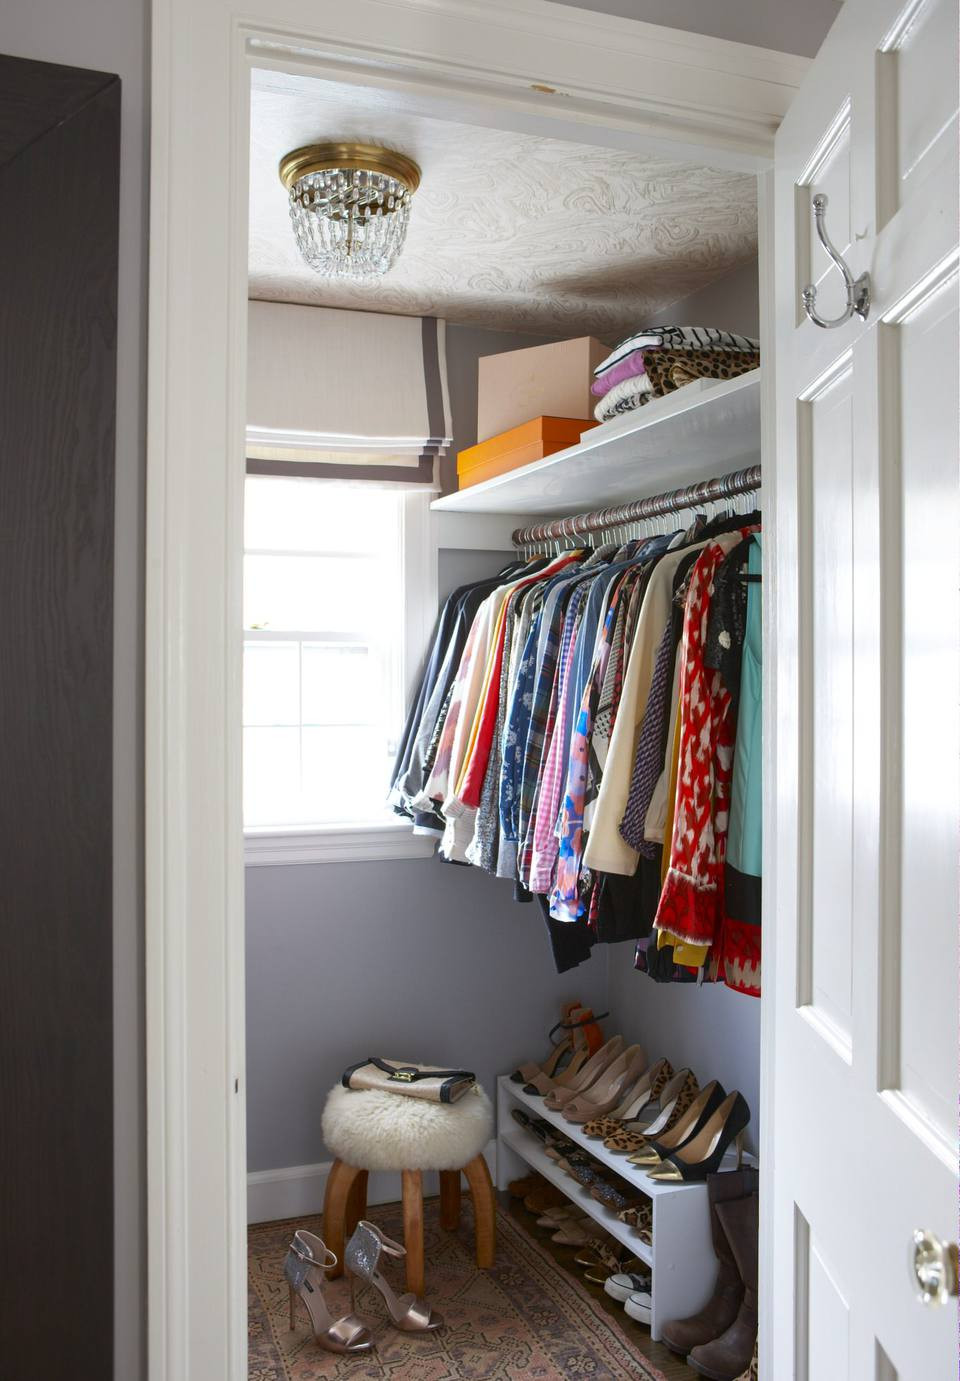 Small Bedroom Closet
 21 Best Small Walk in Closet Storage Ideas for Bedrooms